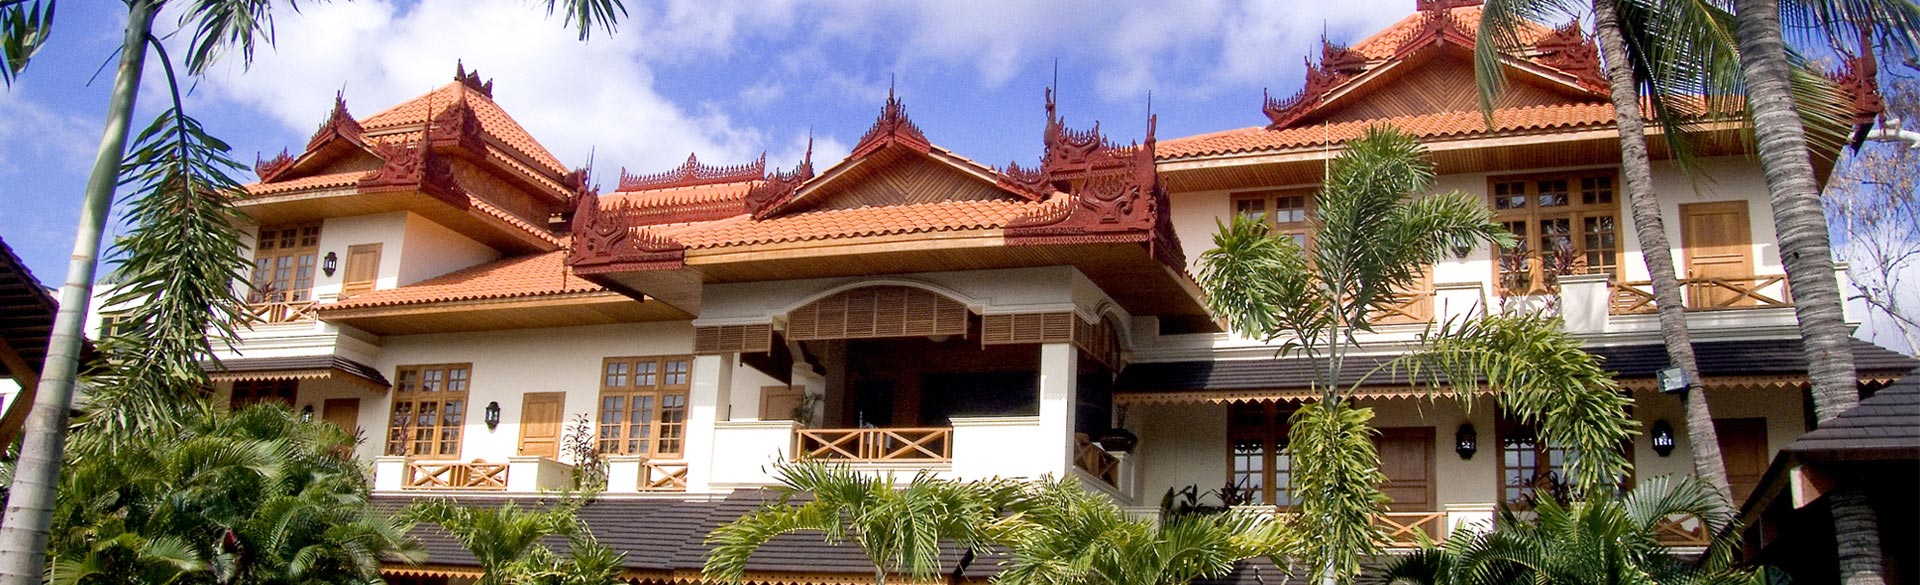 Hotel by the Red Canal, Mandalay